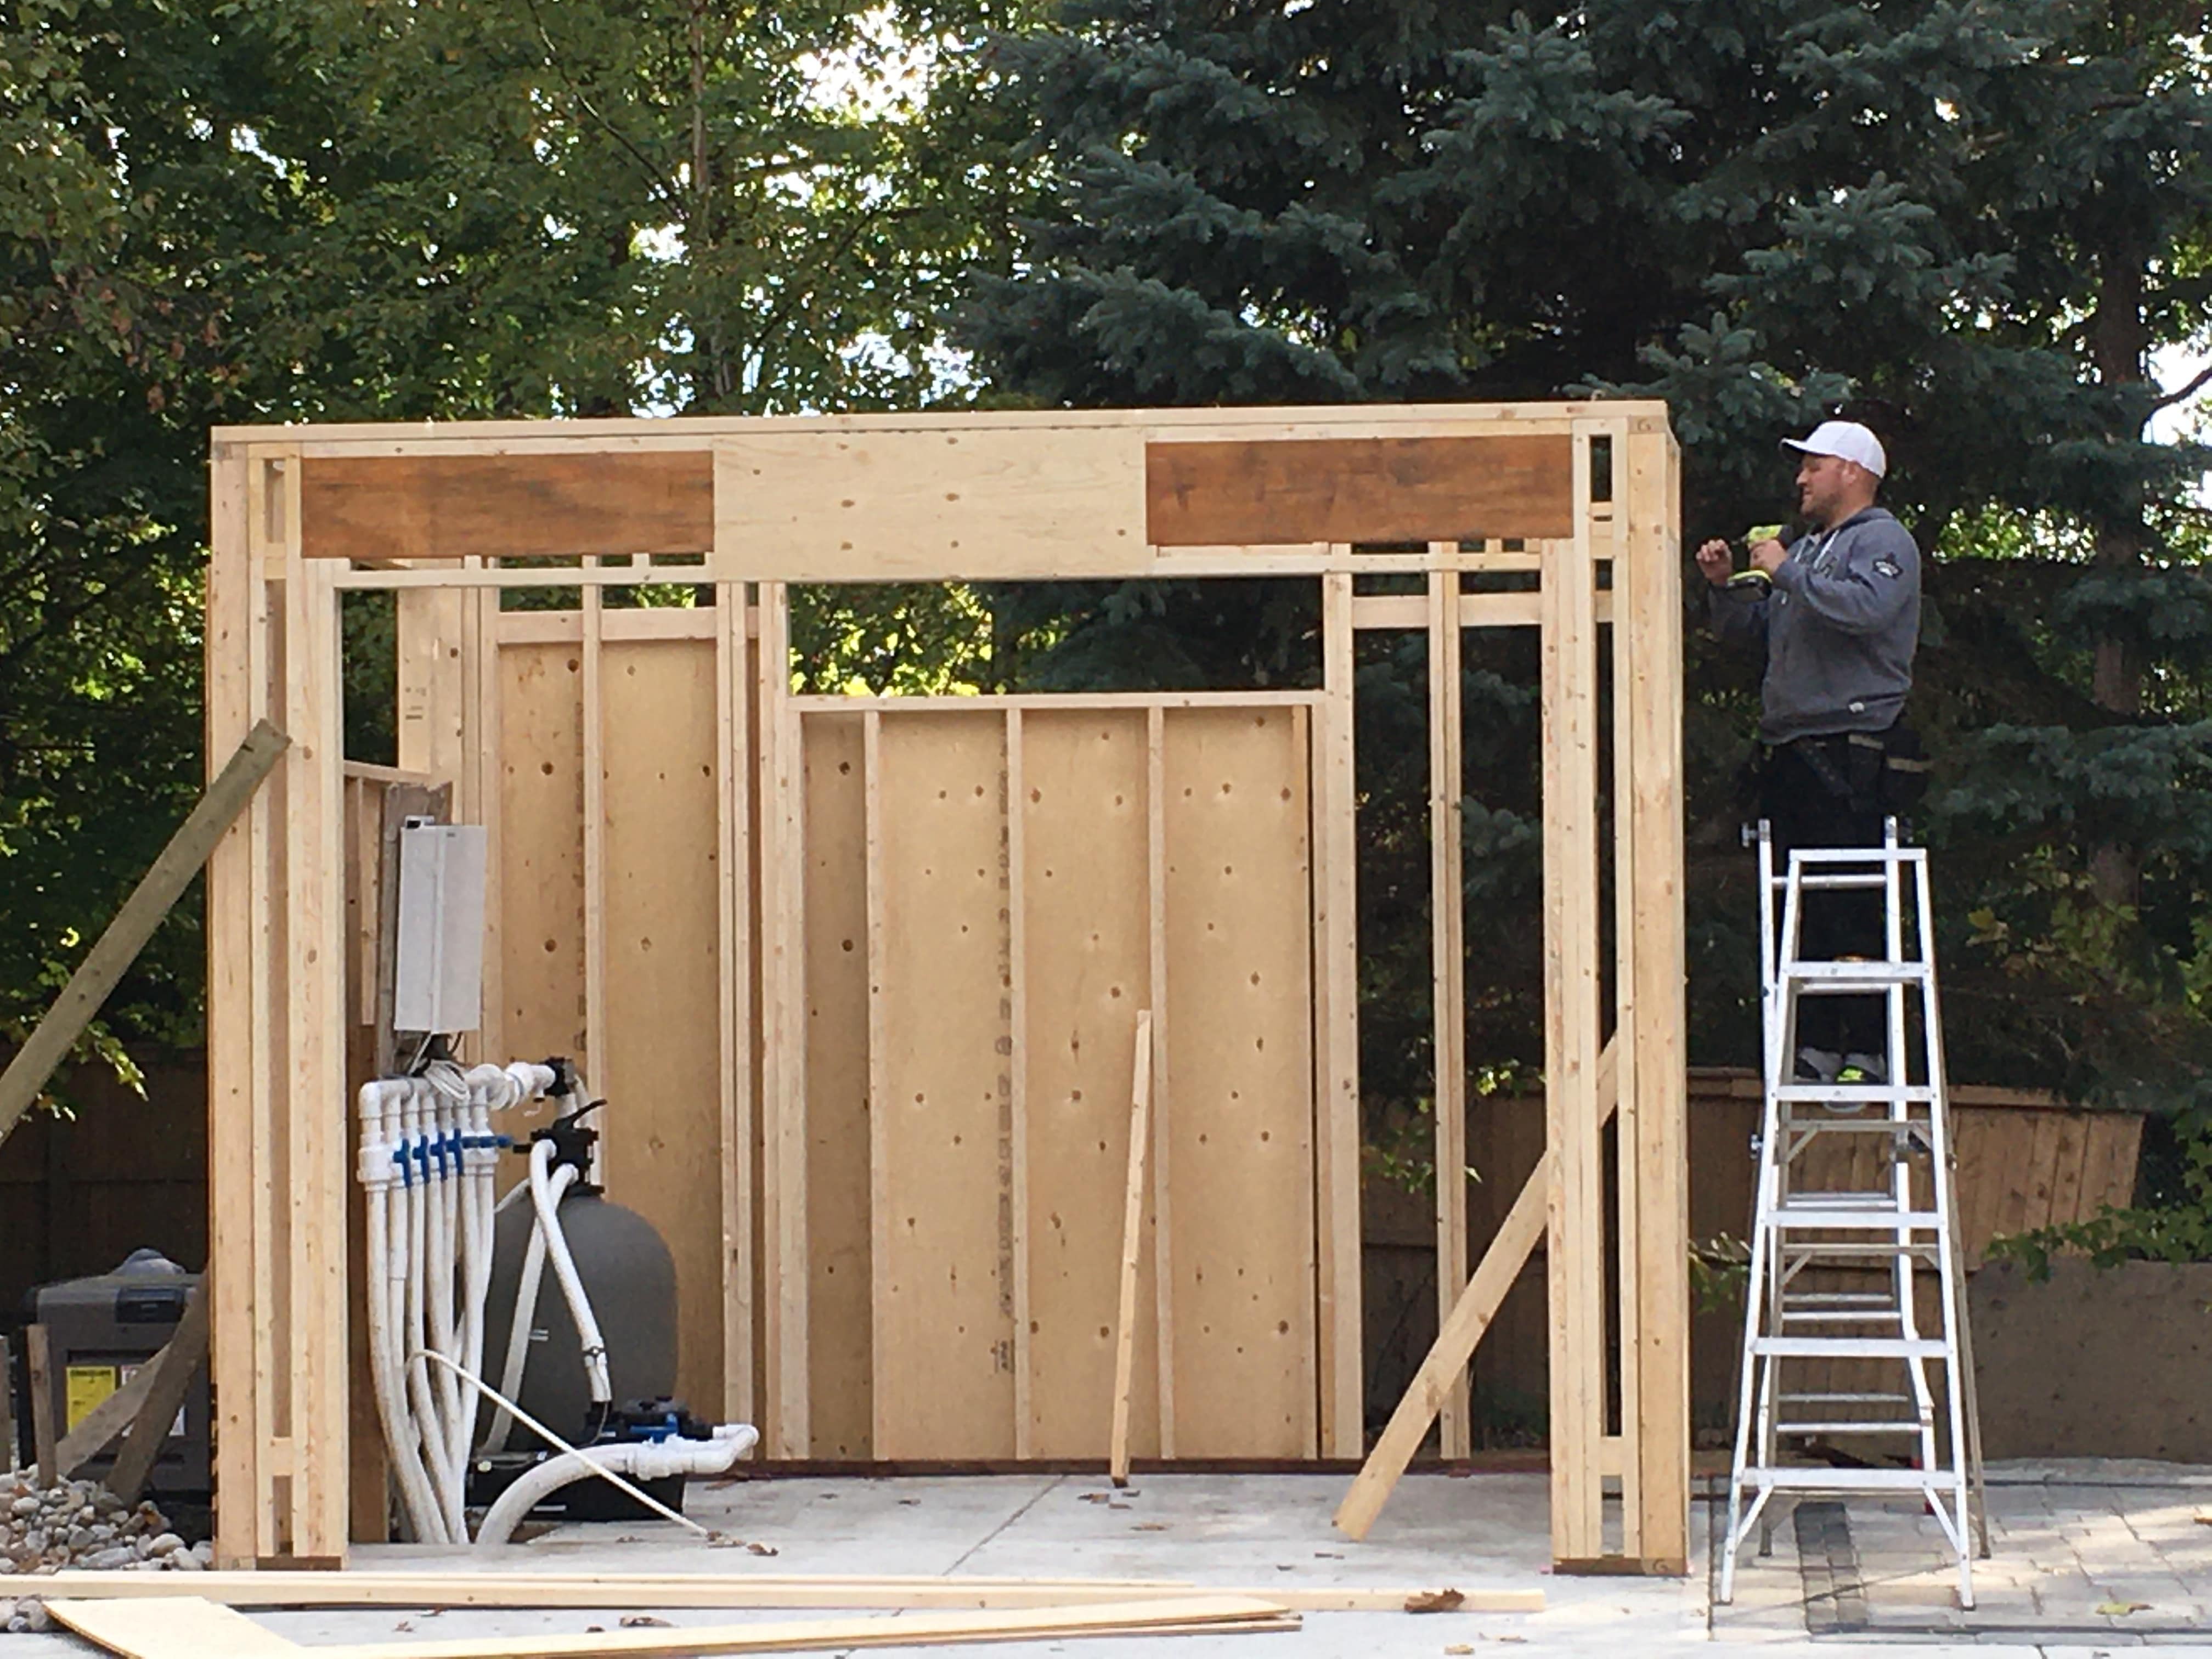 Construction view of 9' x 12' Verana Pool Cabana located in London, Ontario – Summerwood Products